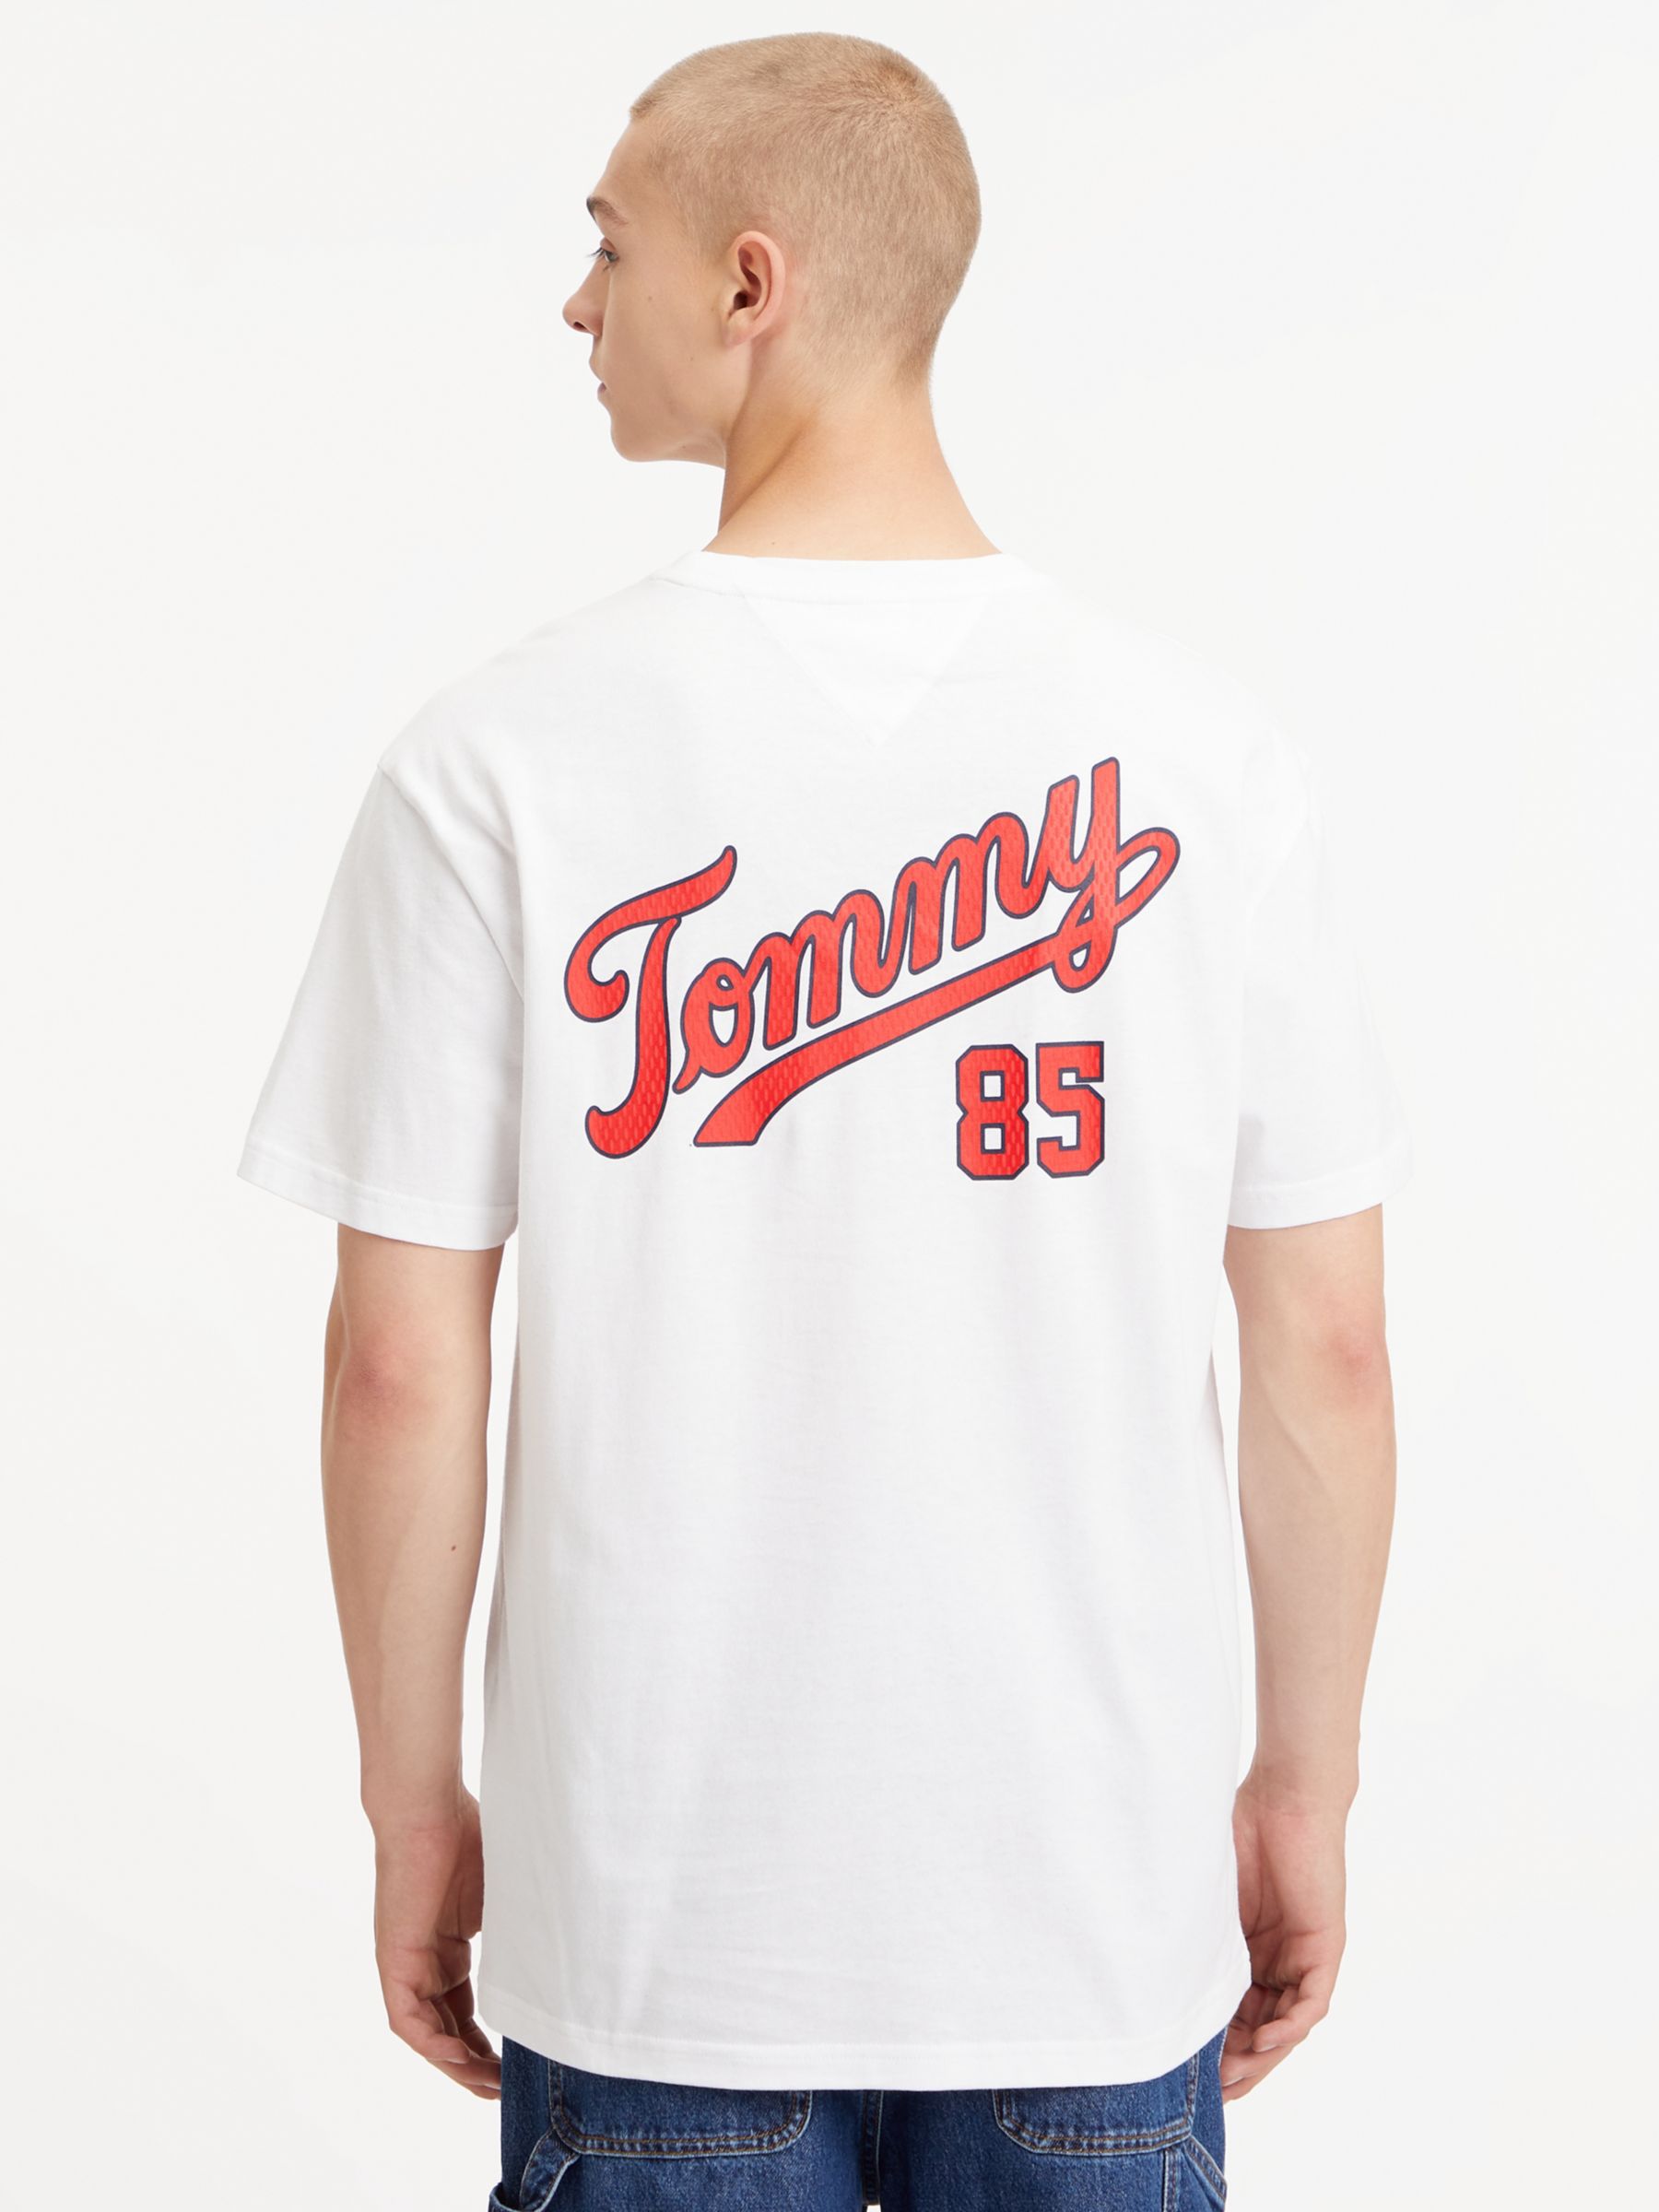 Tommy & Partners Logo College 85 T-Shirt, Organic Lewis Cotton White John Jeans at